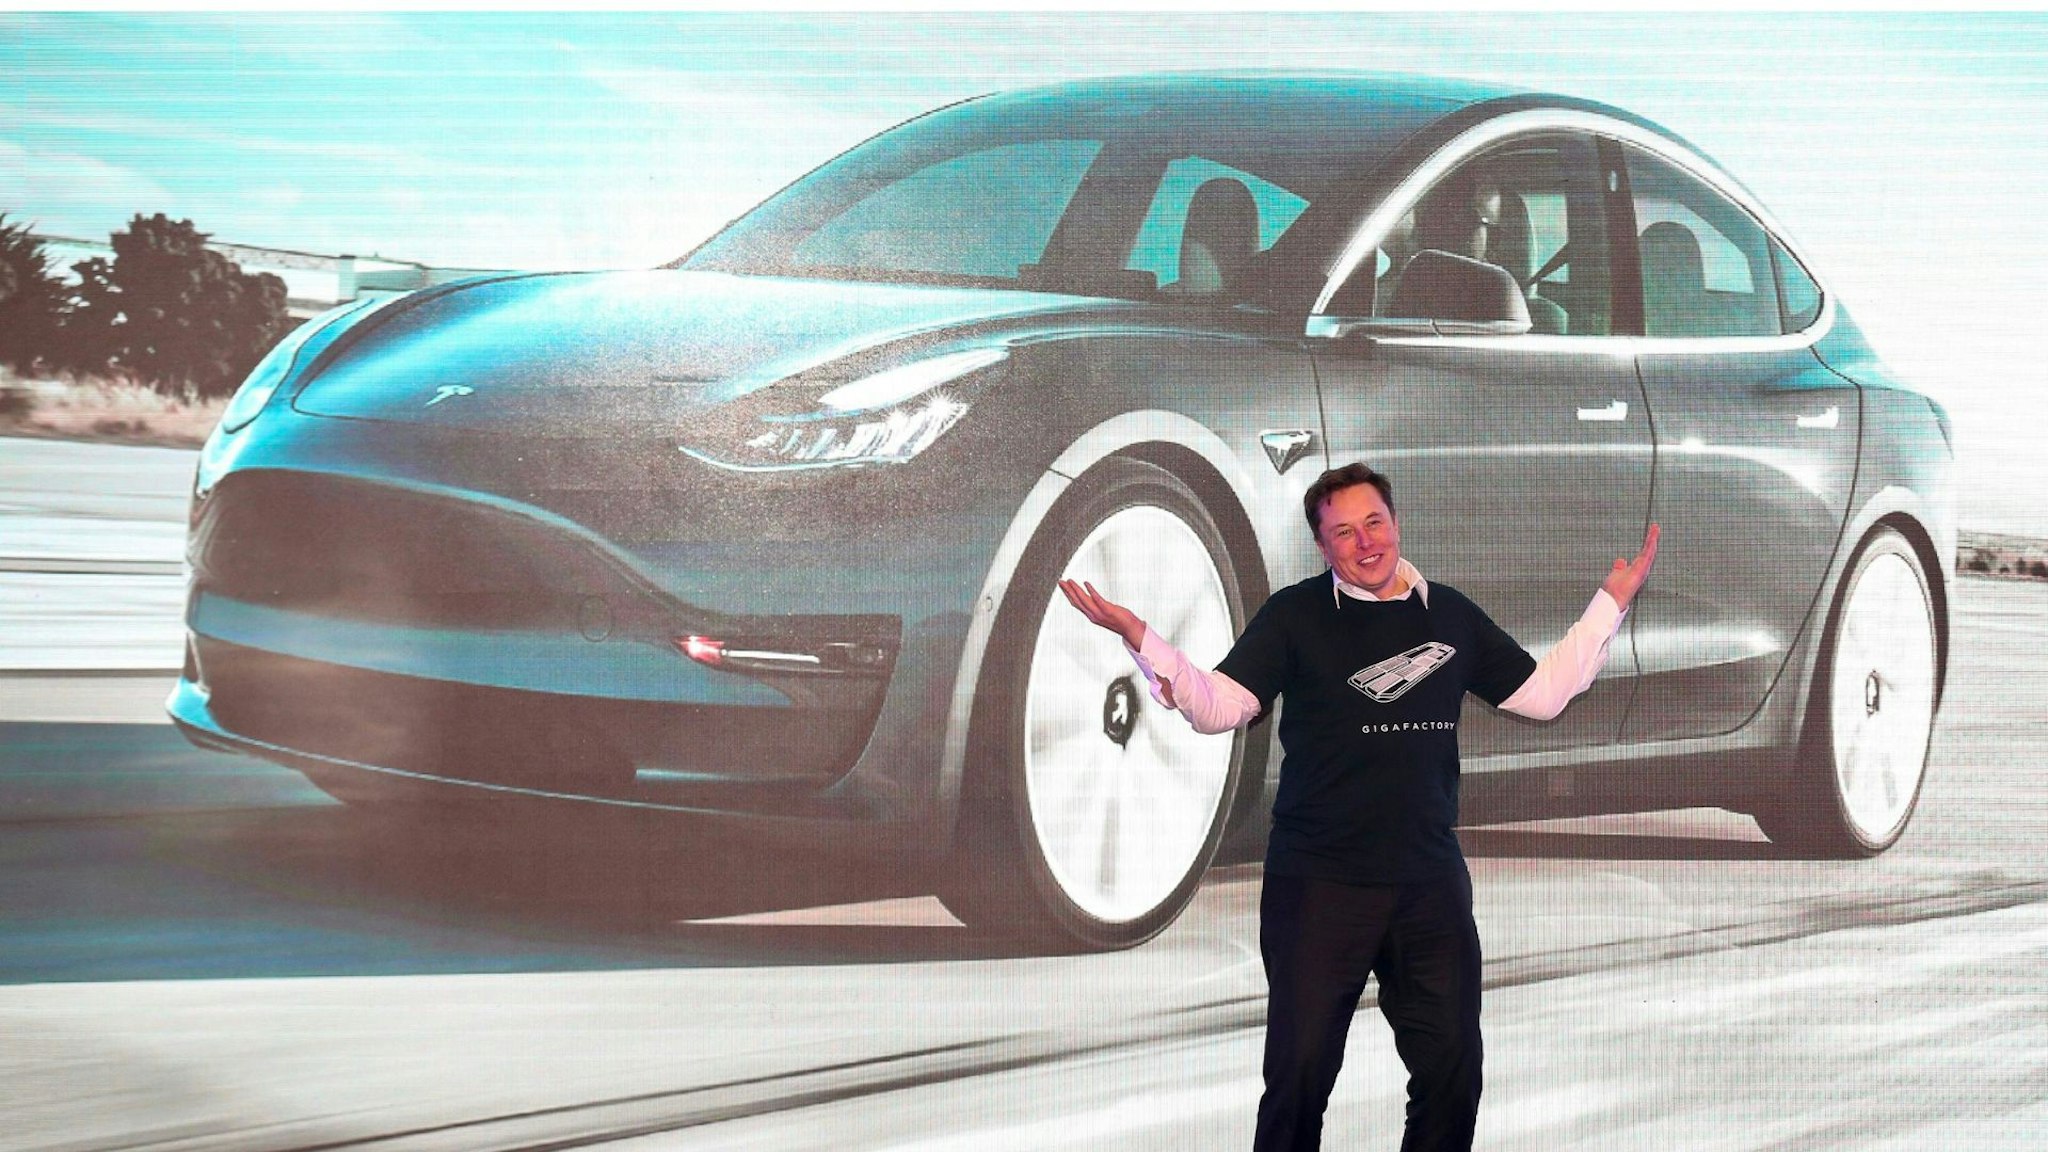 Tesla CEO Elon Musk gestures during the Tesla China-made Model 3 Delivery Ceremony in Shanghai. - Tesla CEO Elon Musk presented the first batch of made-in-China cars to ordinary buyers on January 7, 2020 in a milestone for the company's new Shanghai "giga-factory", but which comes as sales decelerate in the world's largest electric-vehicle market.